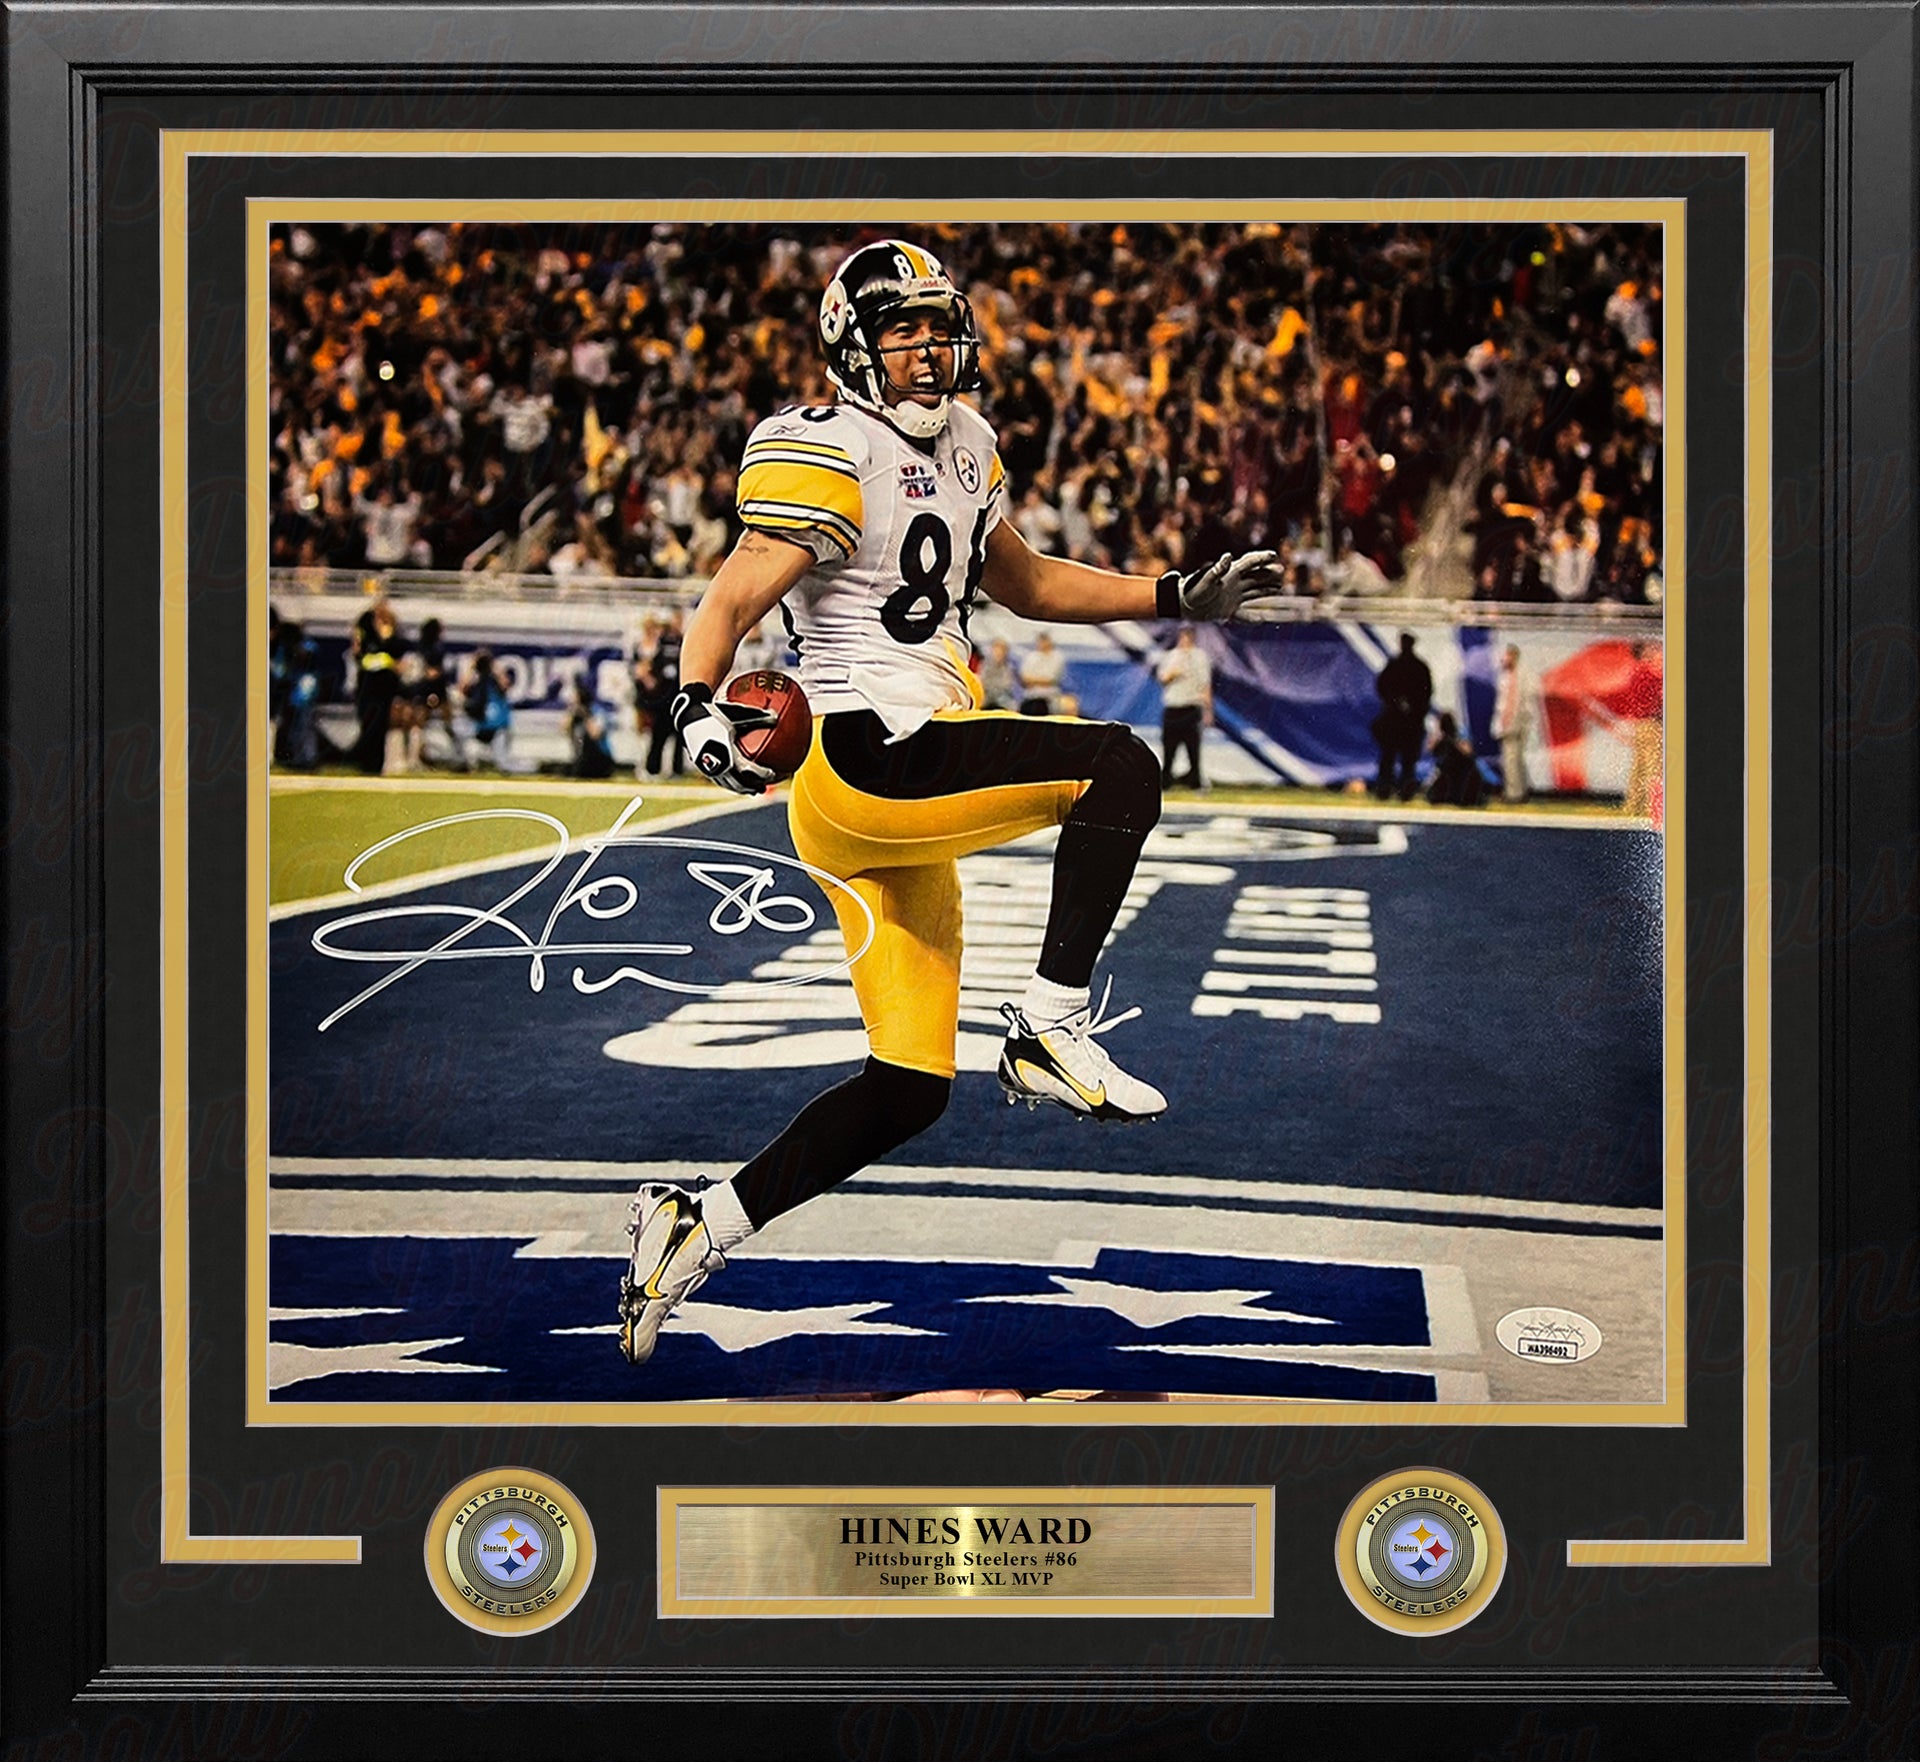 Hines Ward Super Bowl Touchdown Pittsburgh Steelers Autographed Framed Football Photo - Dynasty Sports & Framing 